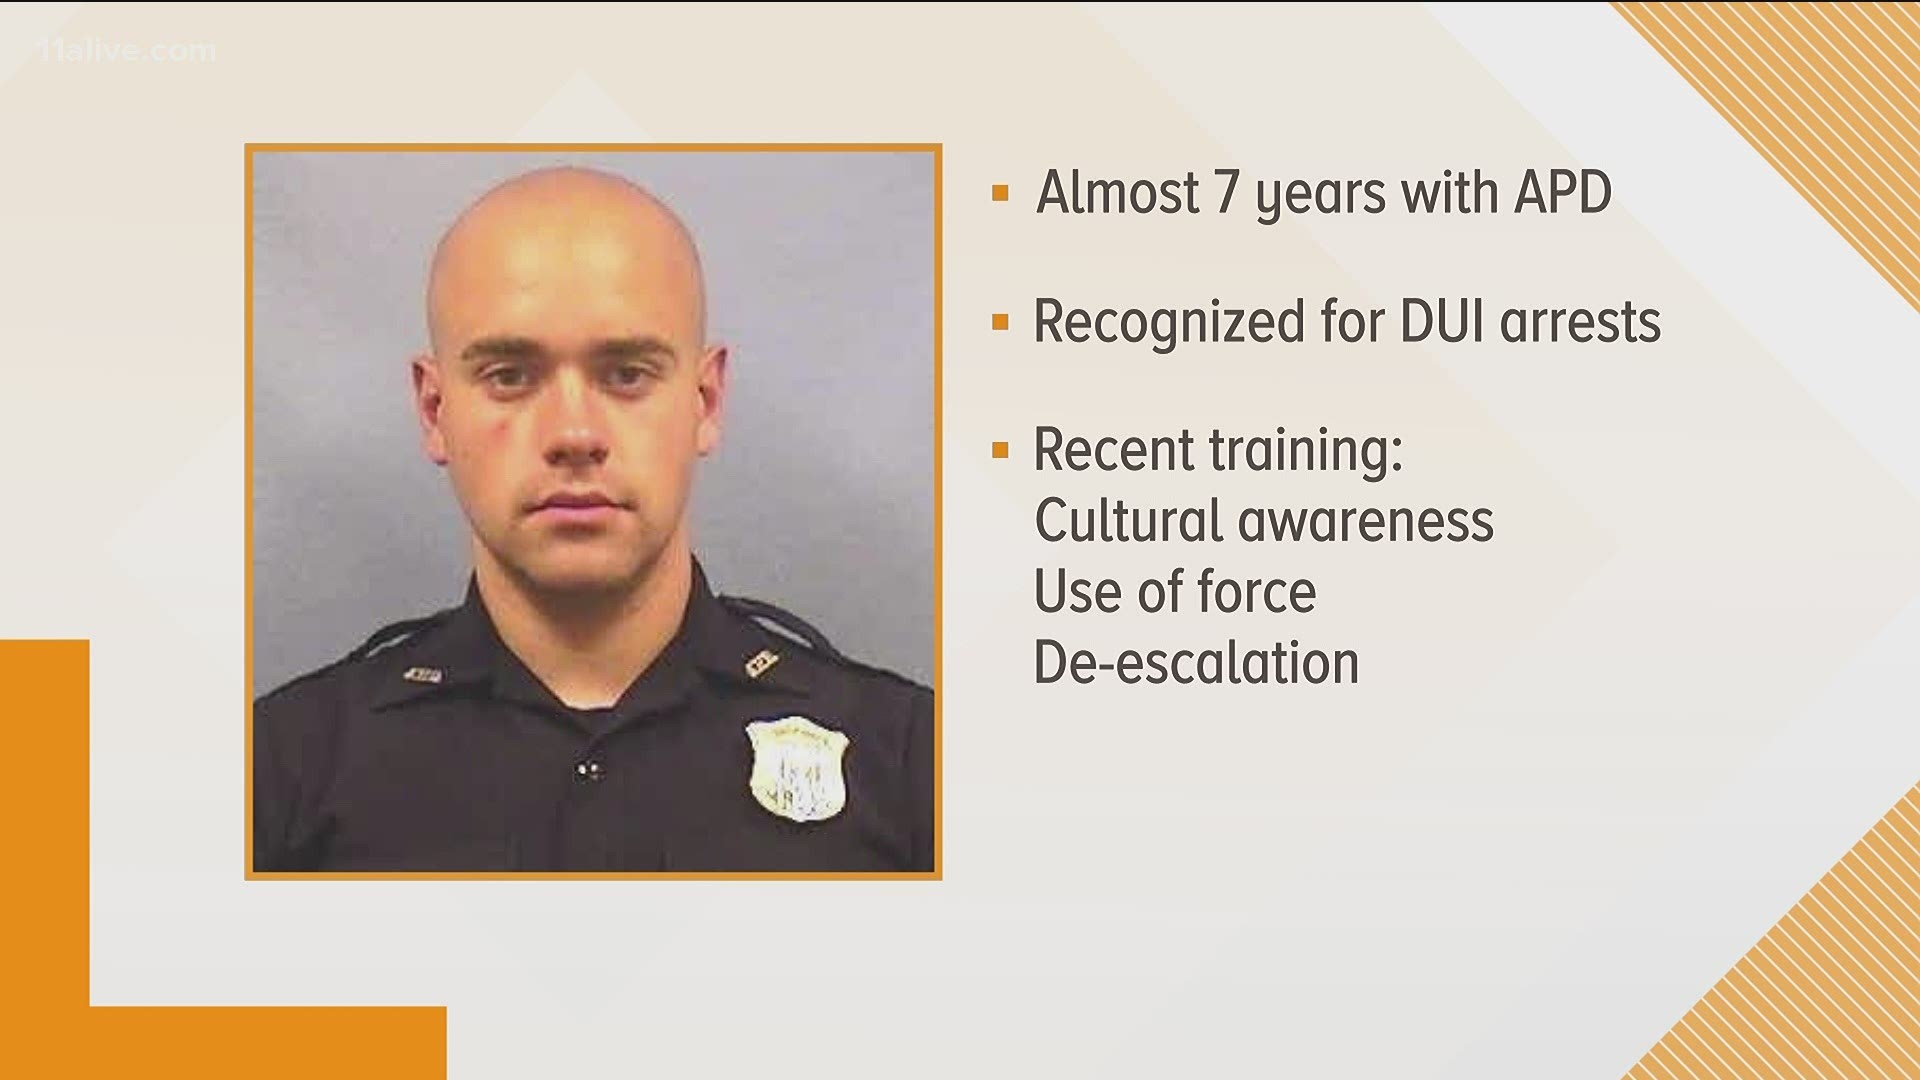 He was honored for making up to 50-99 DUI arrests the previous year.